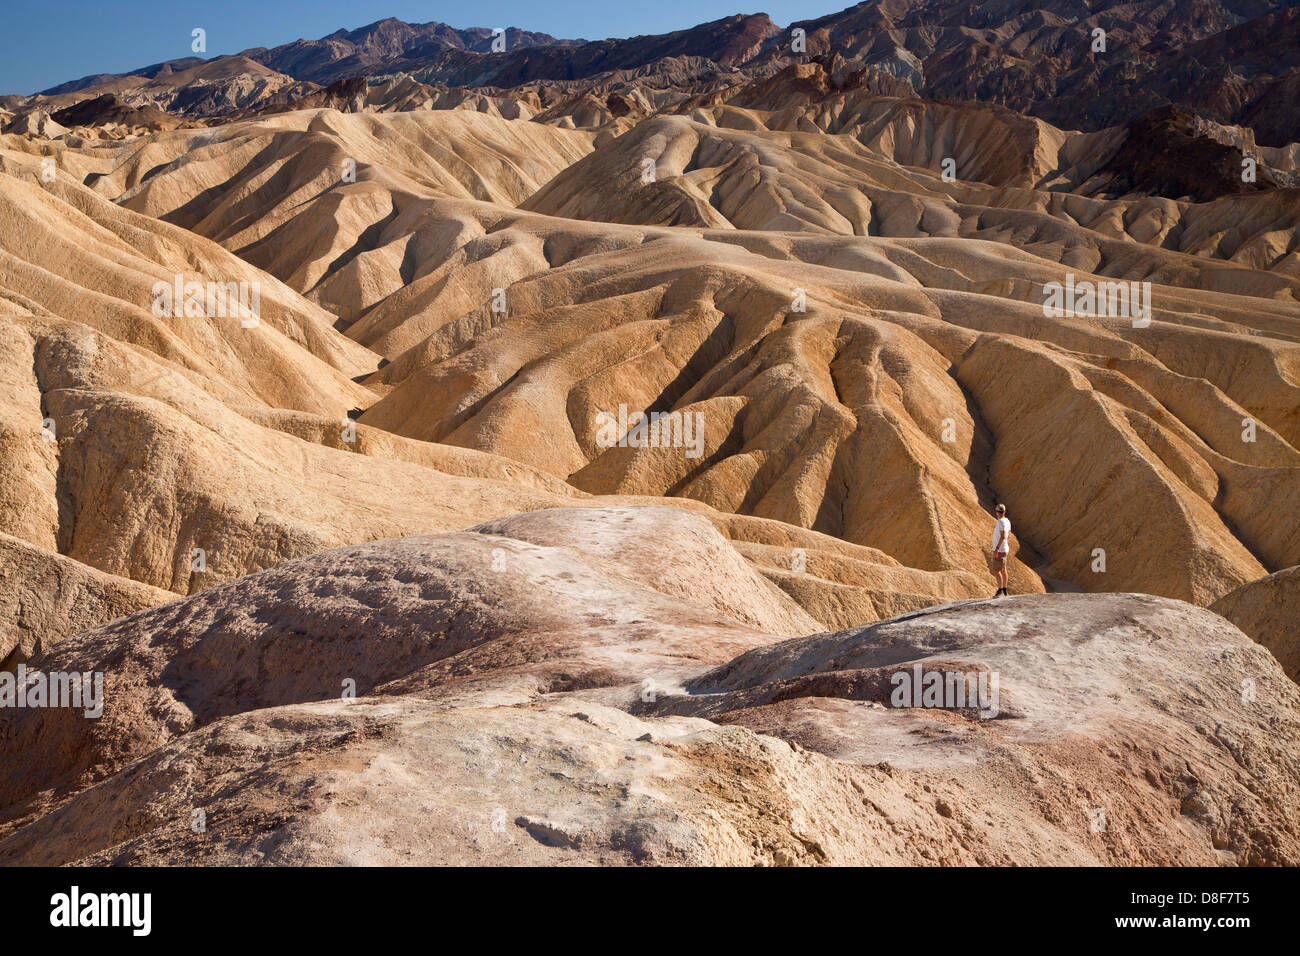 eroded rocks of Zabriskie Point at Death Valley National Park in California, United States of America, USA Stock Photo